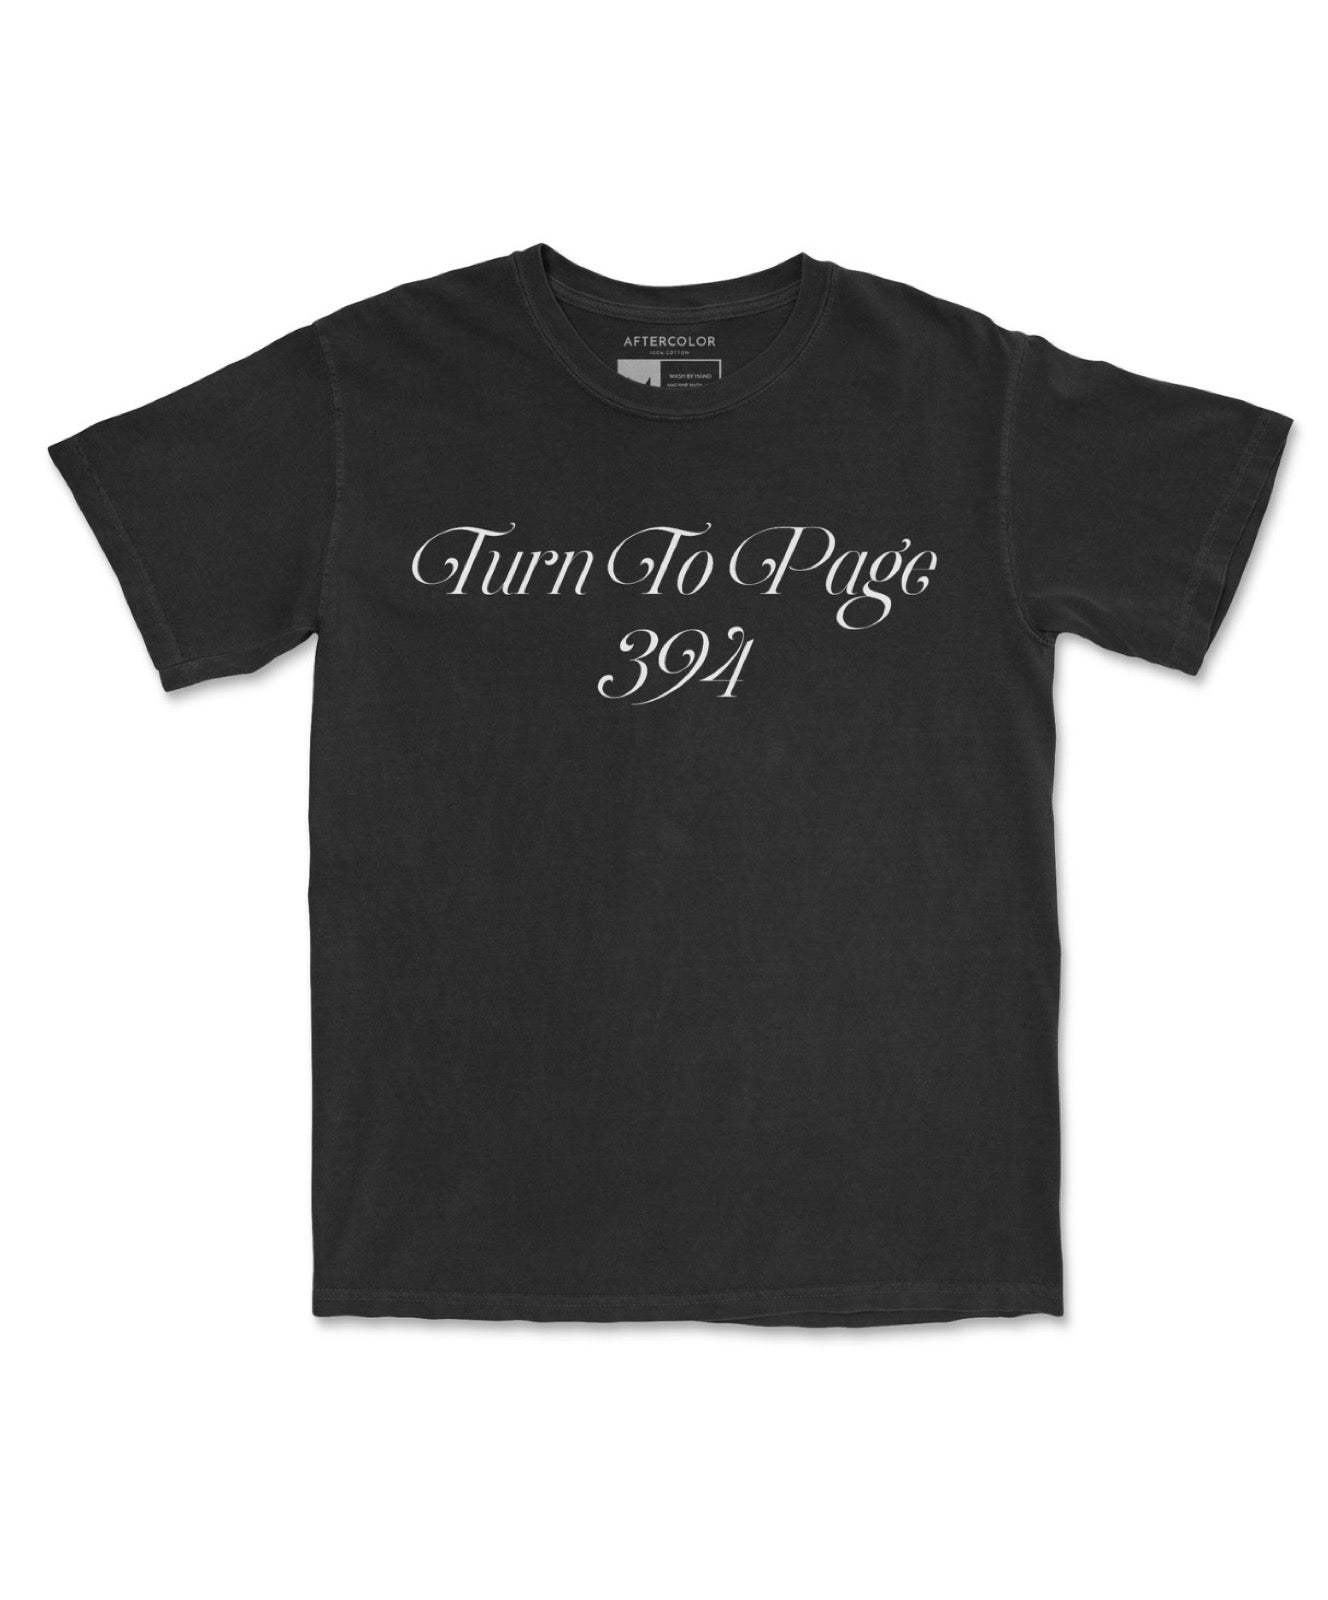 Turn To Page 394 Graphic Tee